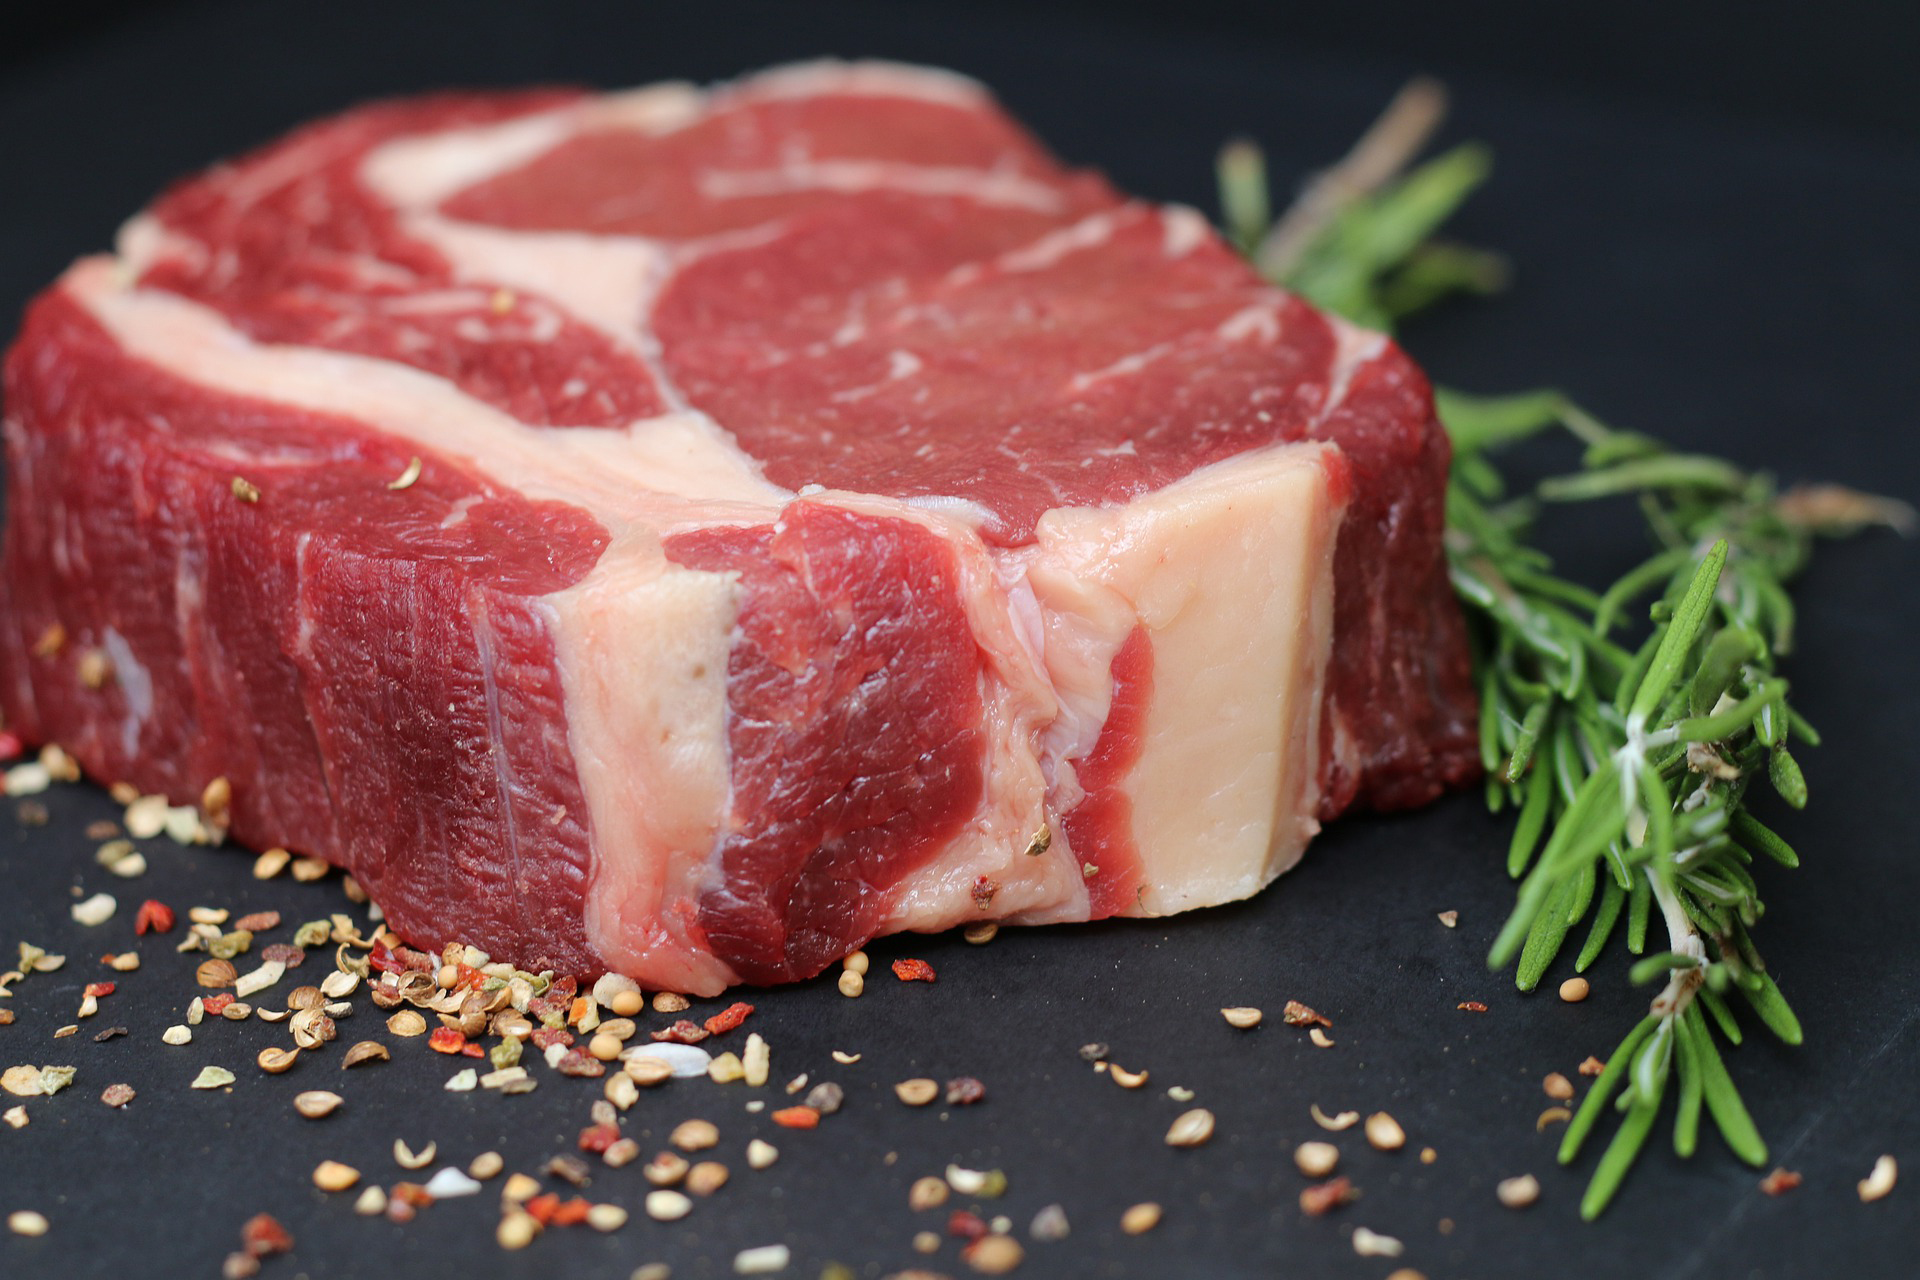 Is beef healthy for you?